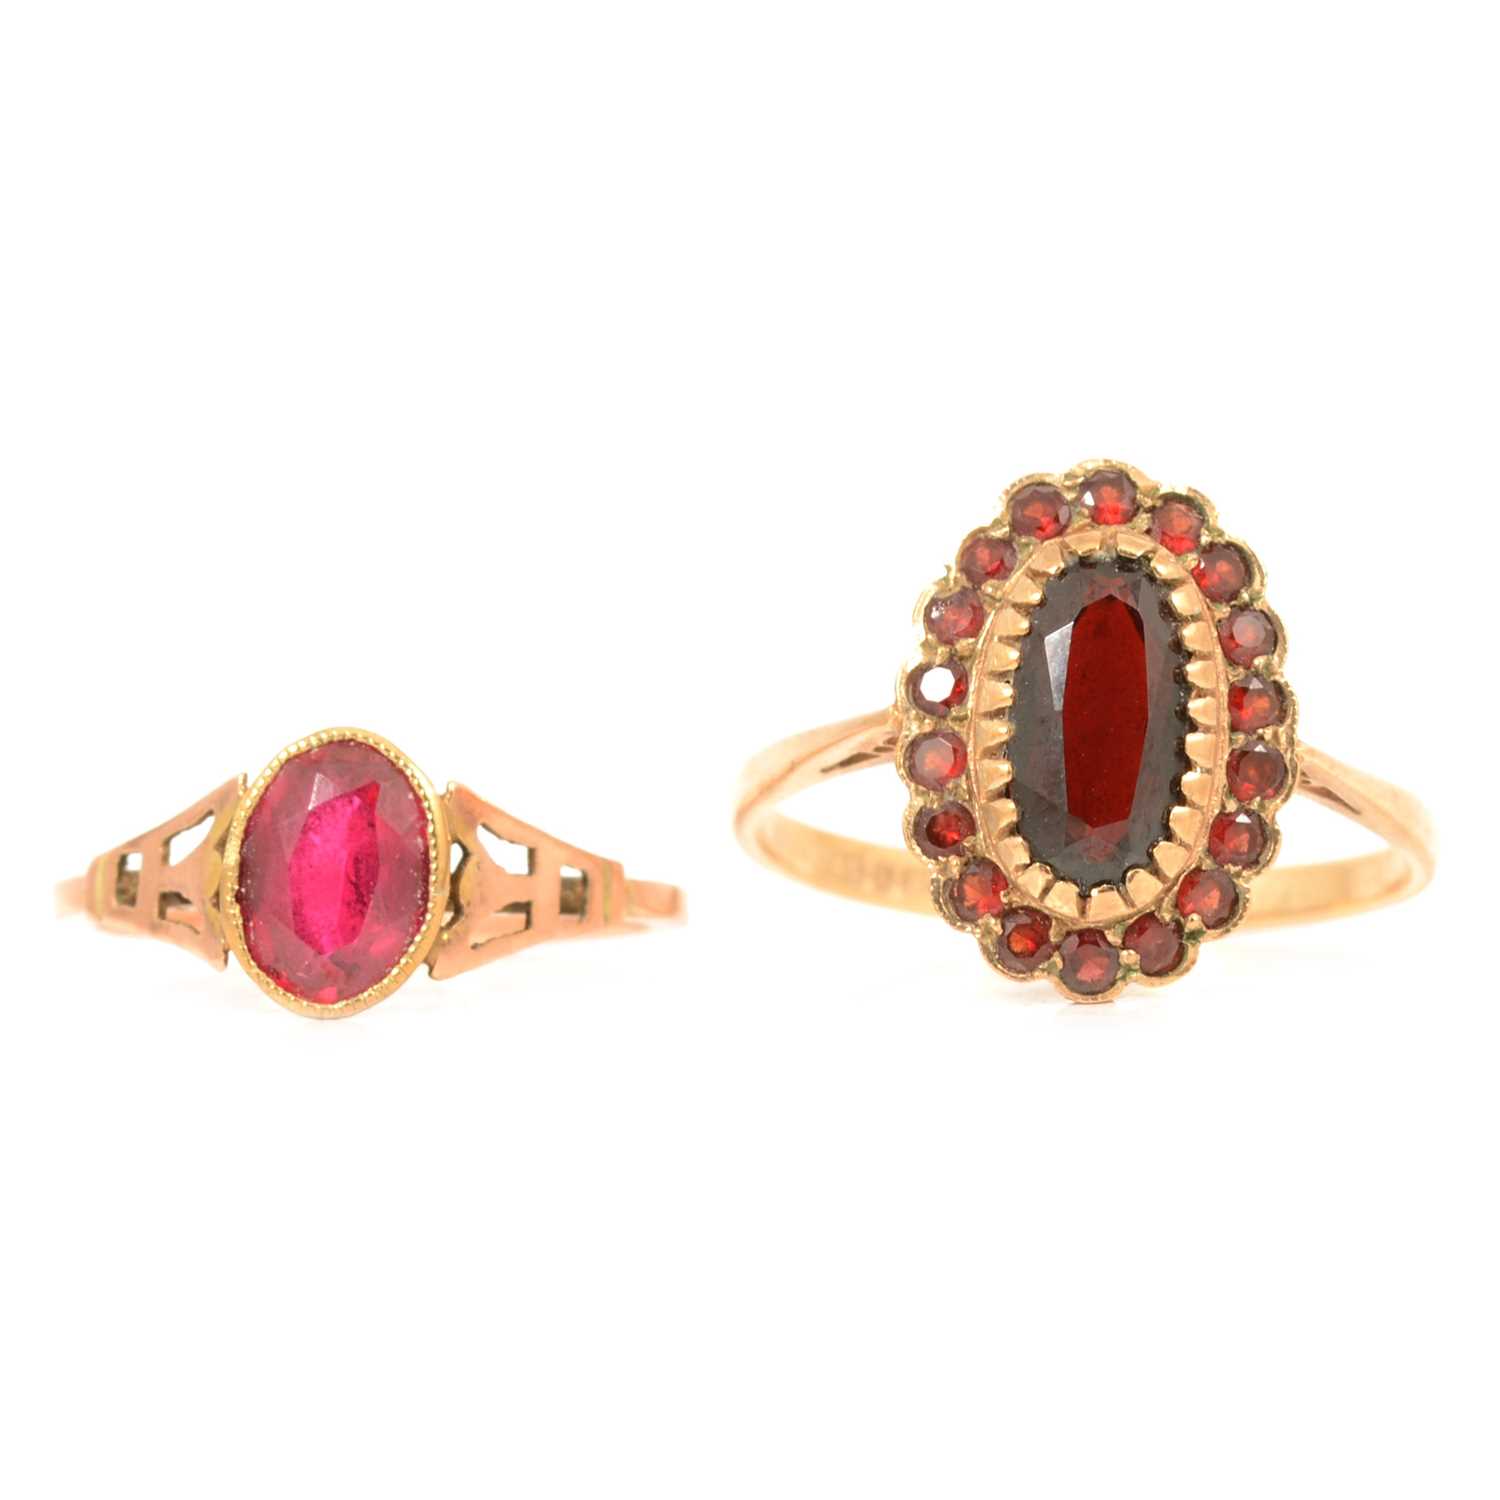 Four gemset rings. - Image 2 of 2